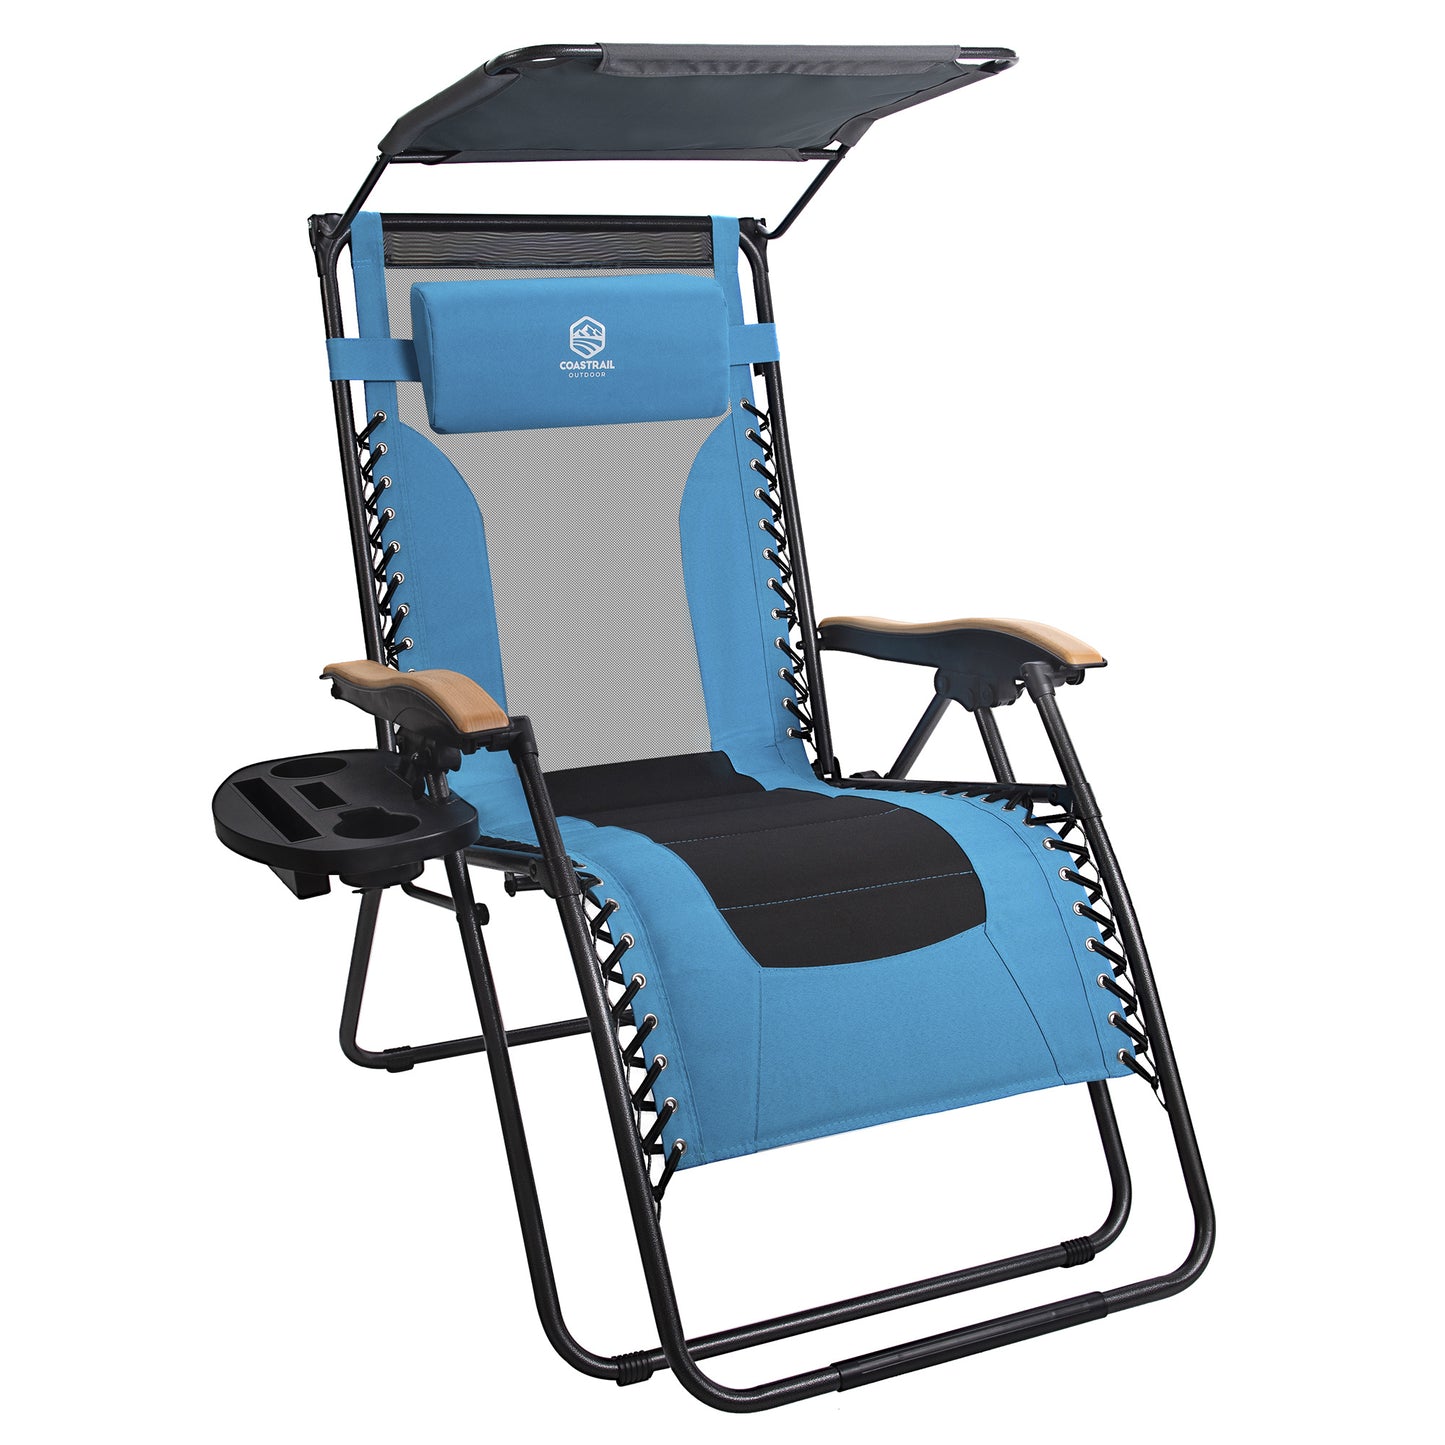 Outdoor Premium Zero Gravity Reclining Lounge Chair with Sun Shade;  Padded Seat;  Cool Mesh Back;  Pillow;  Cup Holder & Side Table for Sports Yard Patio Lawn Camping;  Support 400lbs